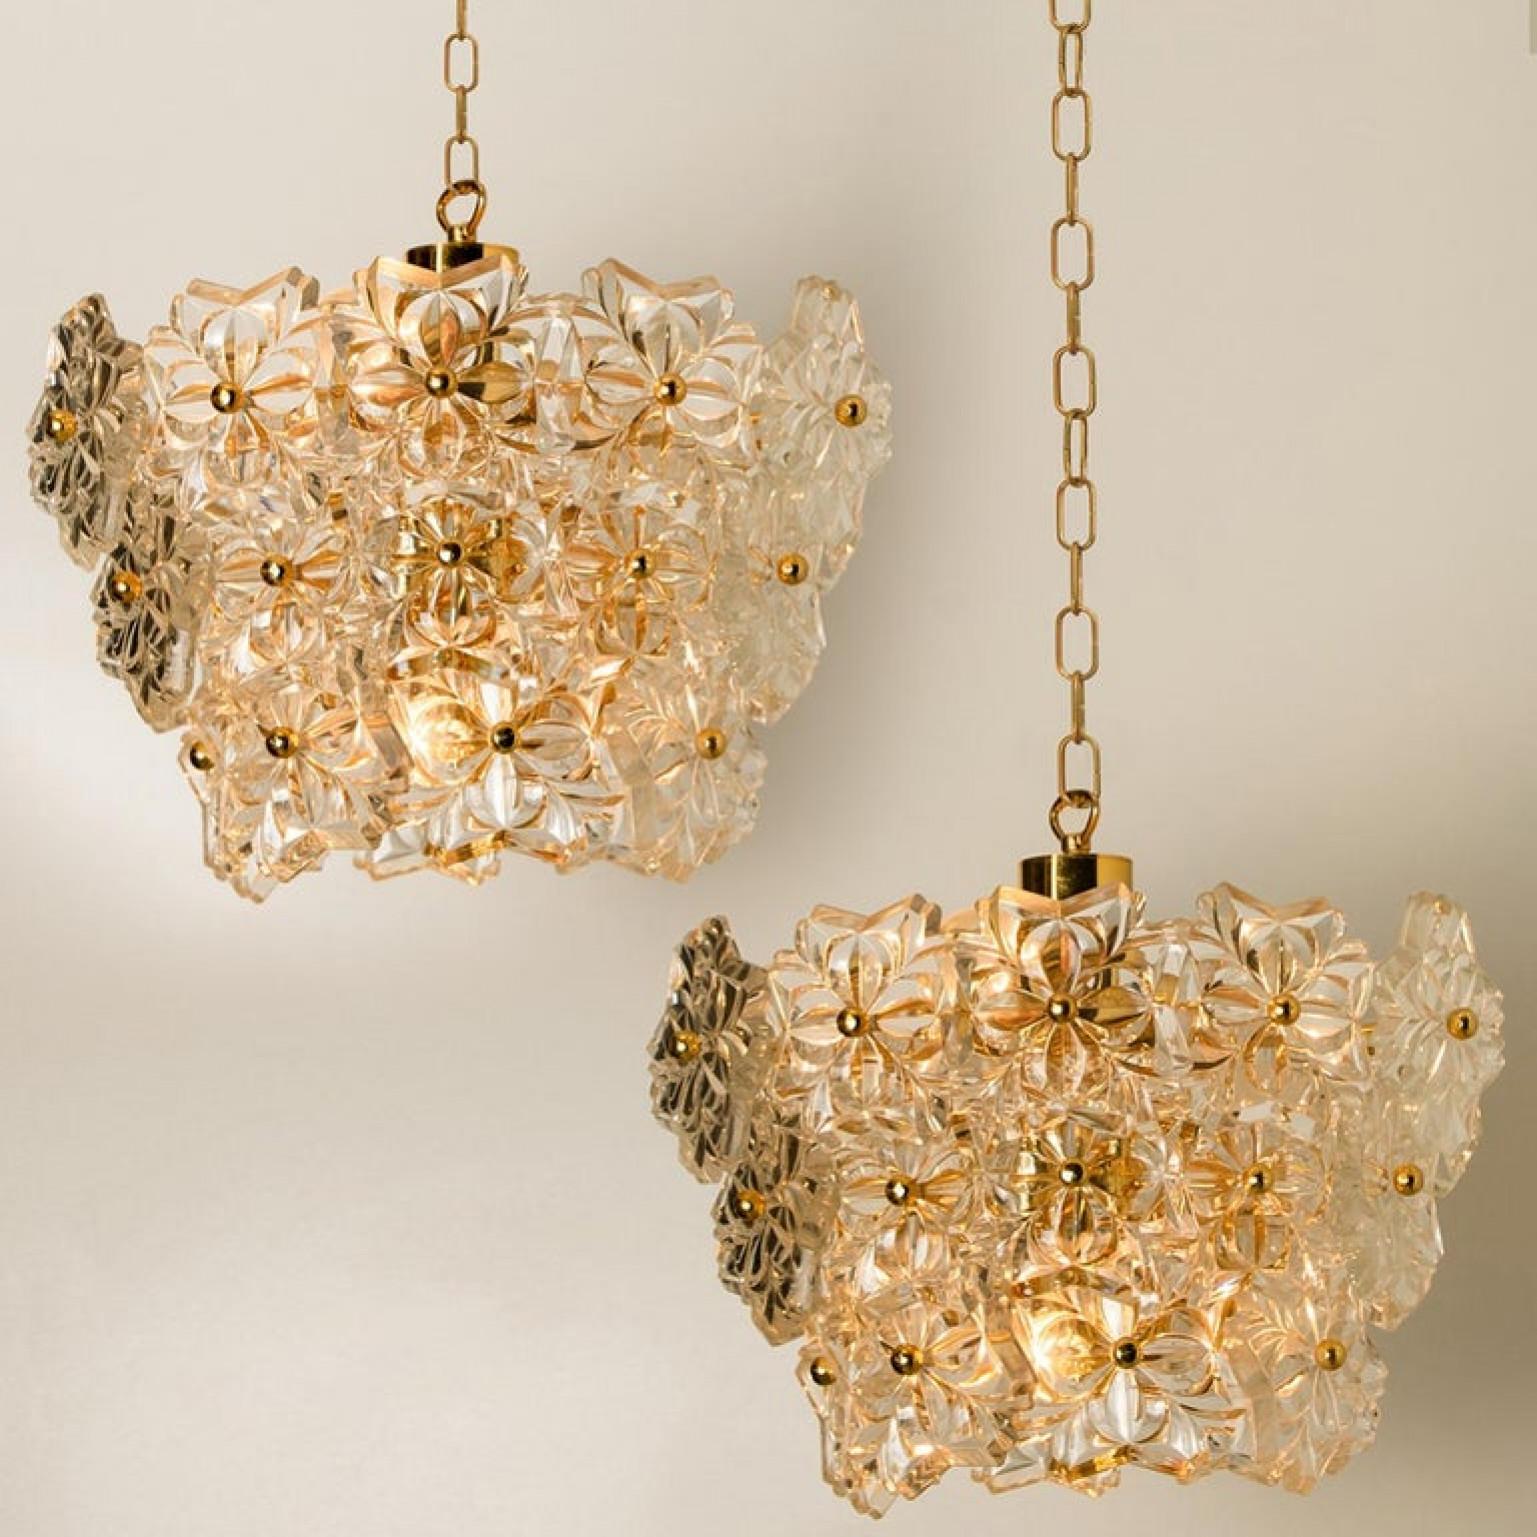 Pair of Glass and Brass Floral Three Tiers Light Fixture from Hillebrand, 1970s For Sale 7